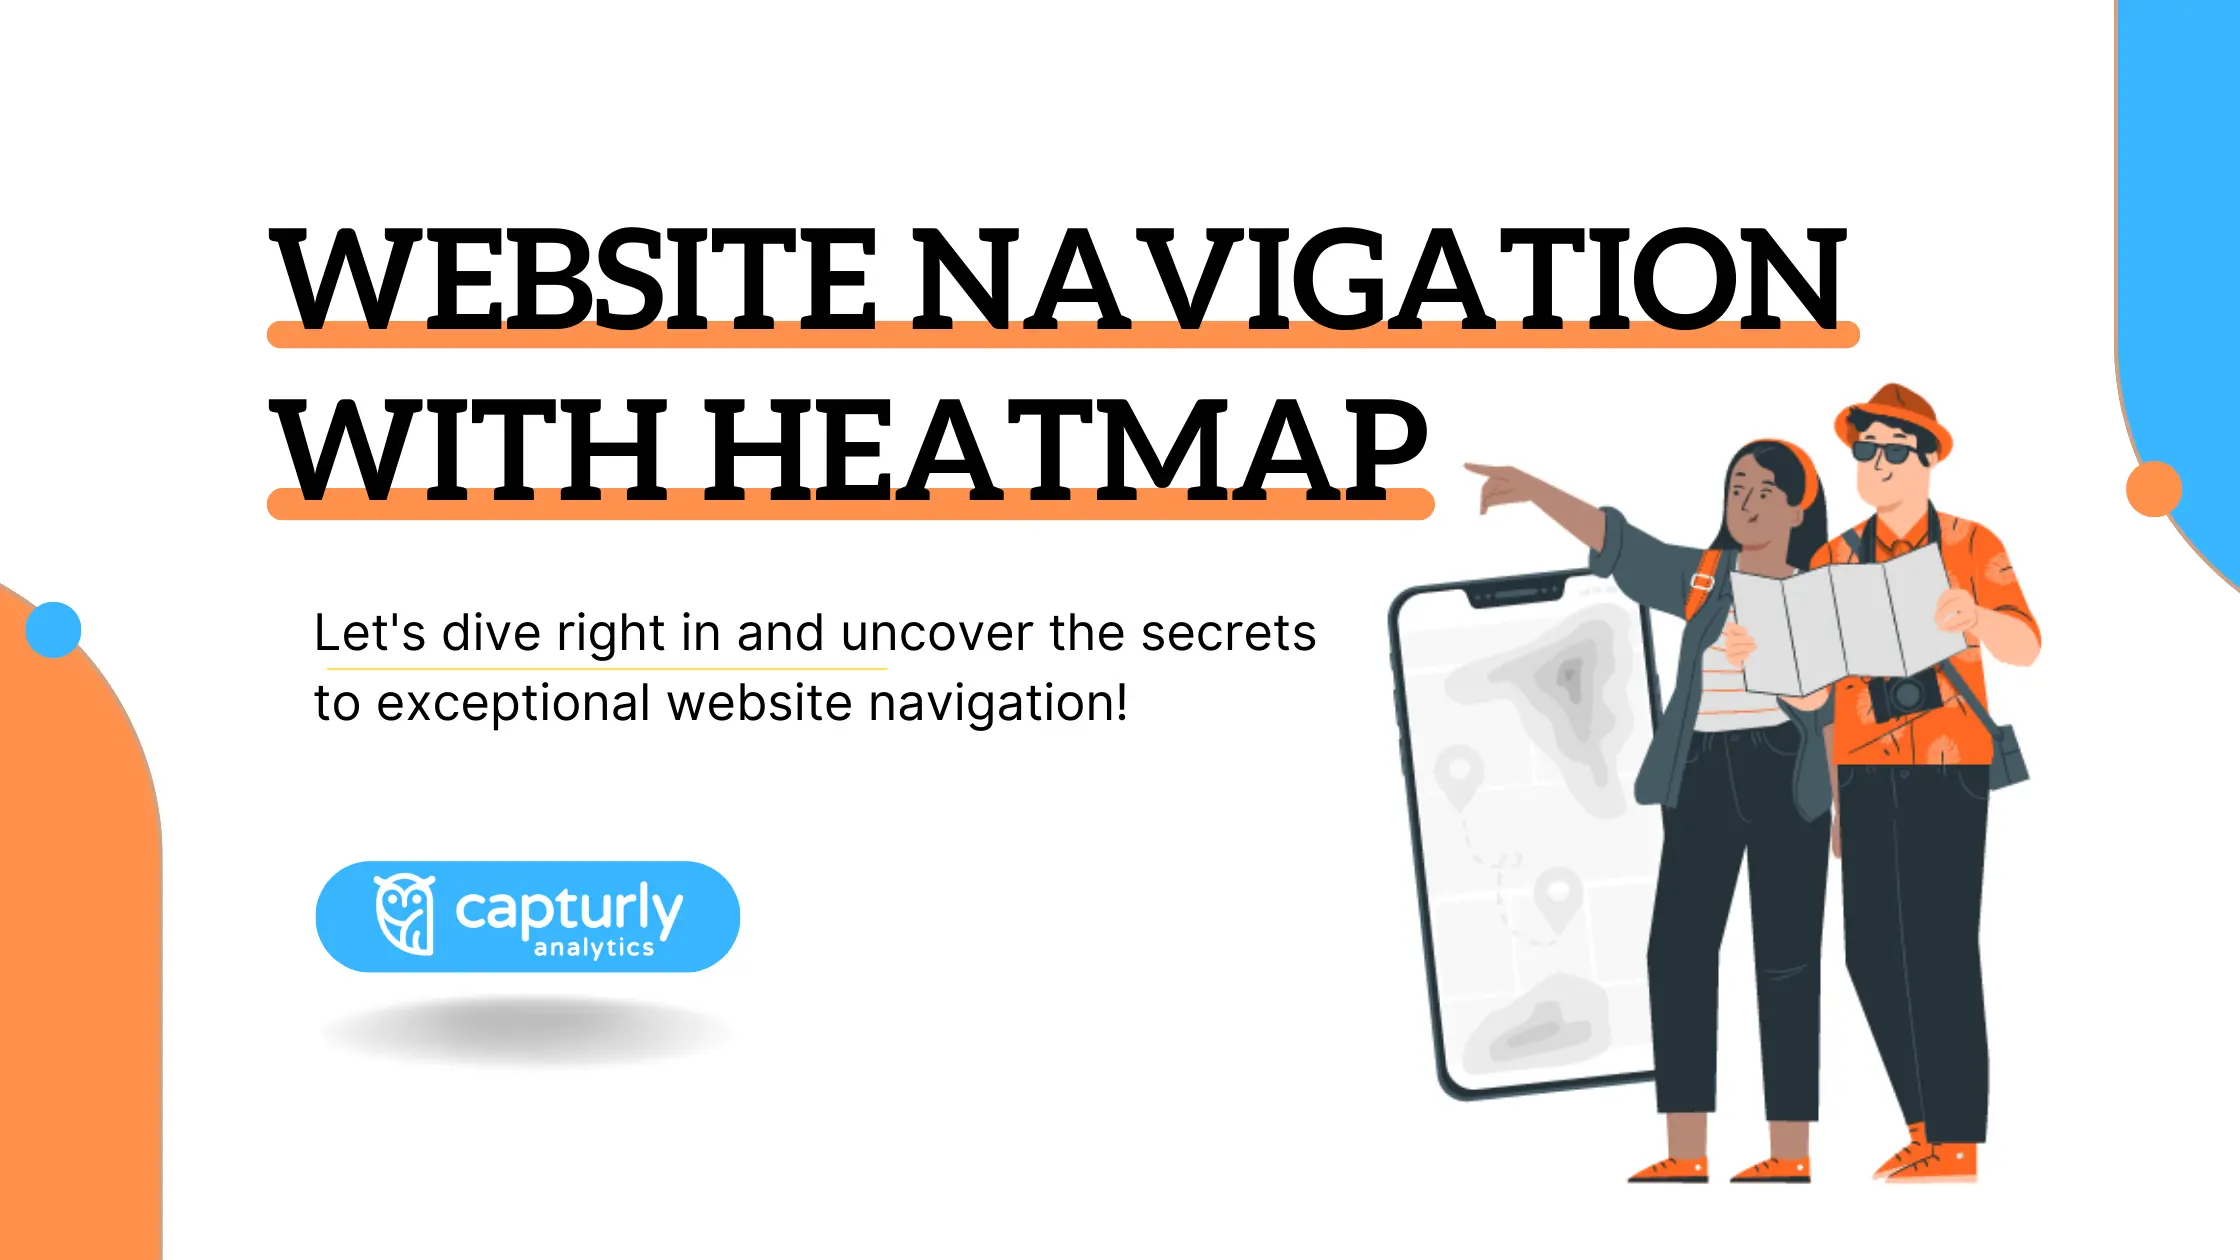 How to Improve Website Navigation with Heatmap Analysis Practical Tips and Tricks